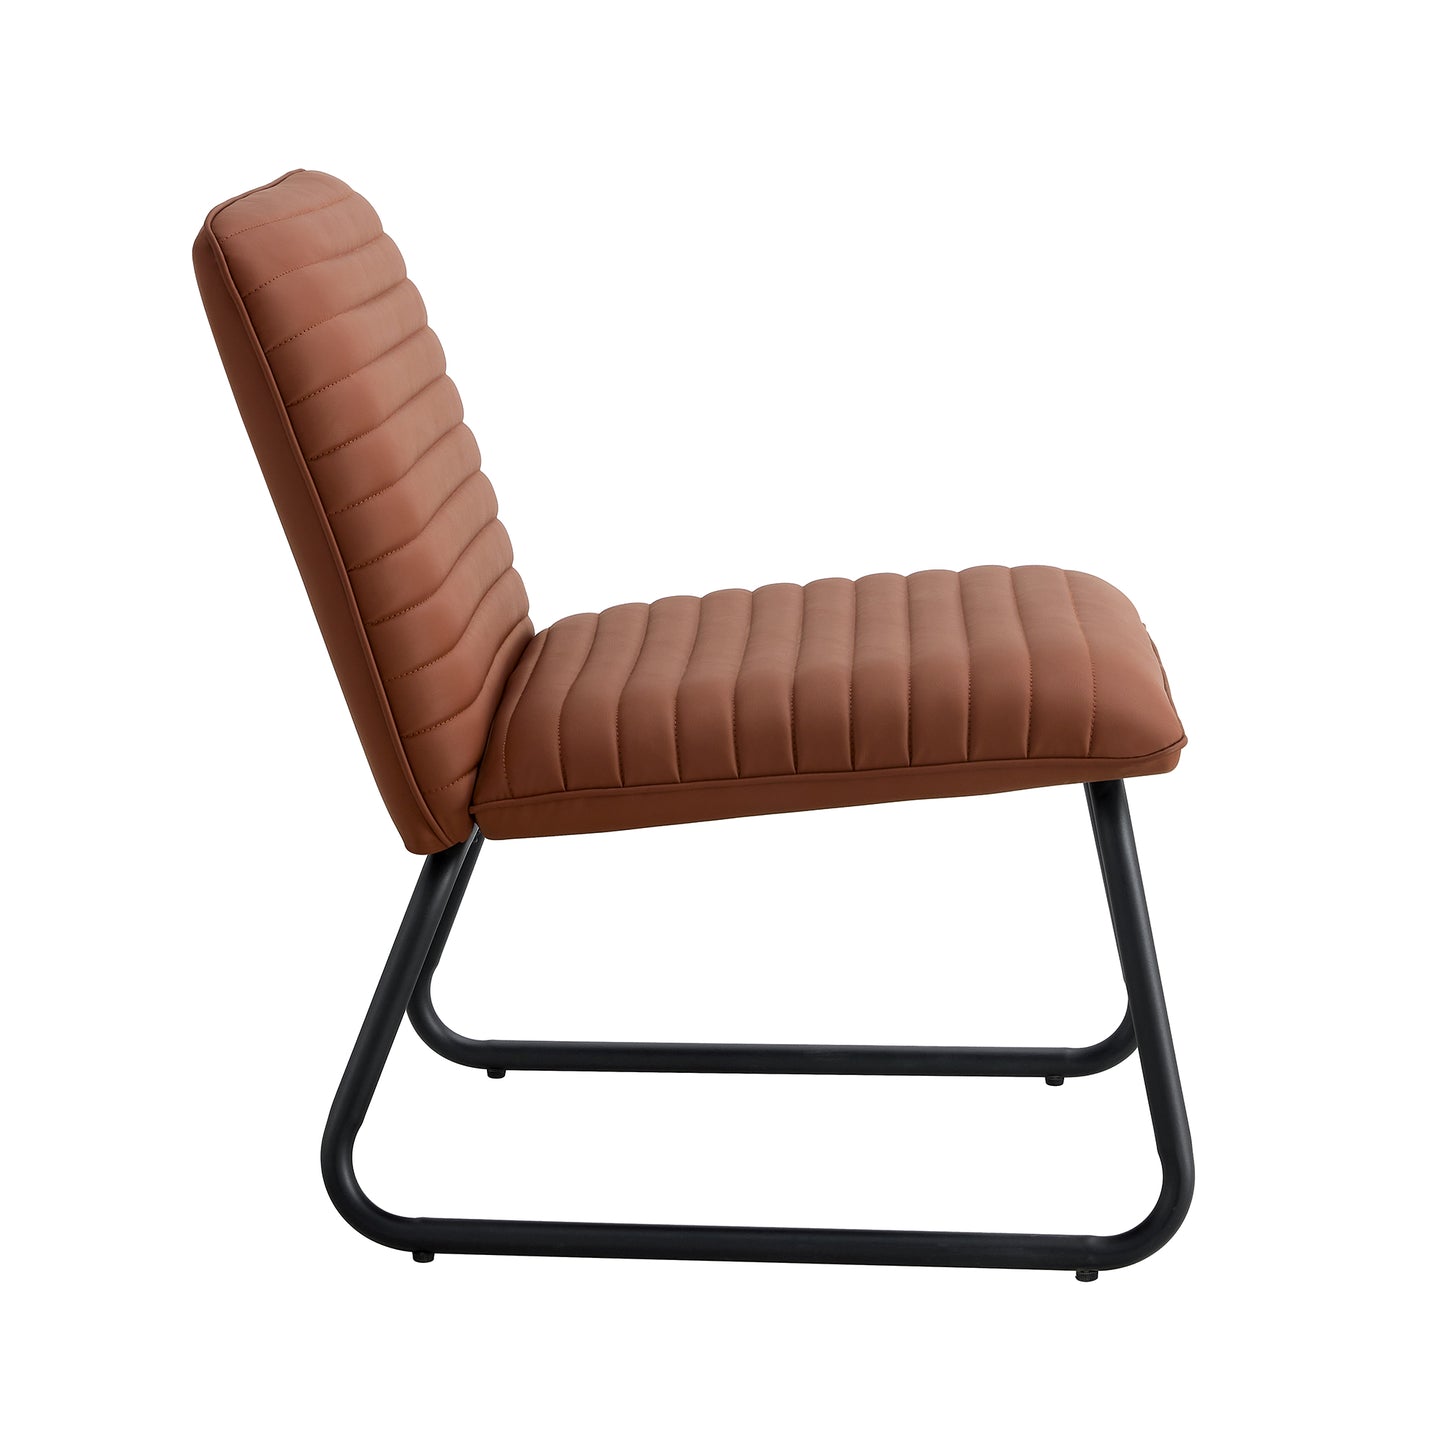 Brown minimalist armless sofa chair with PU backrest and black metal legs